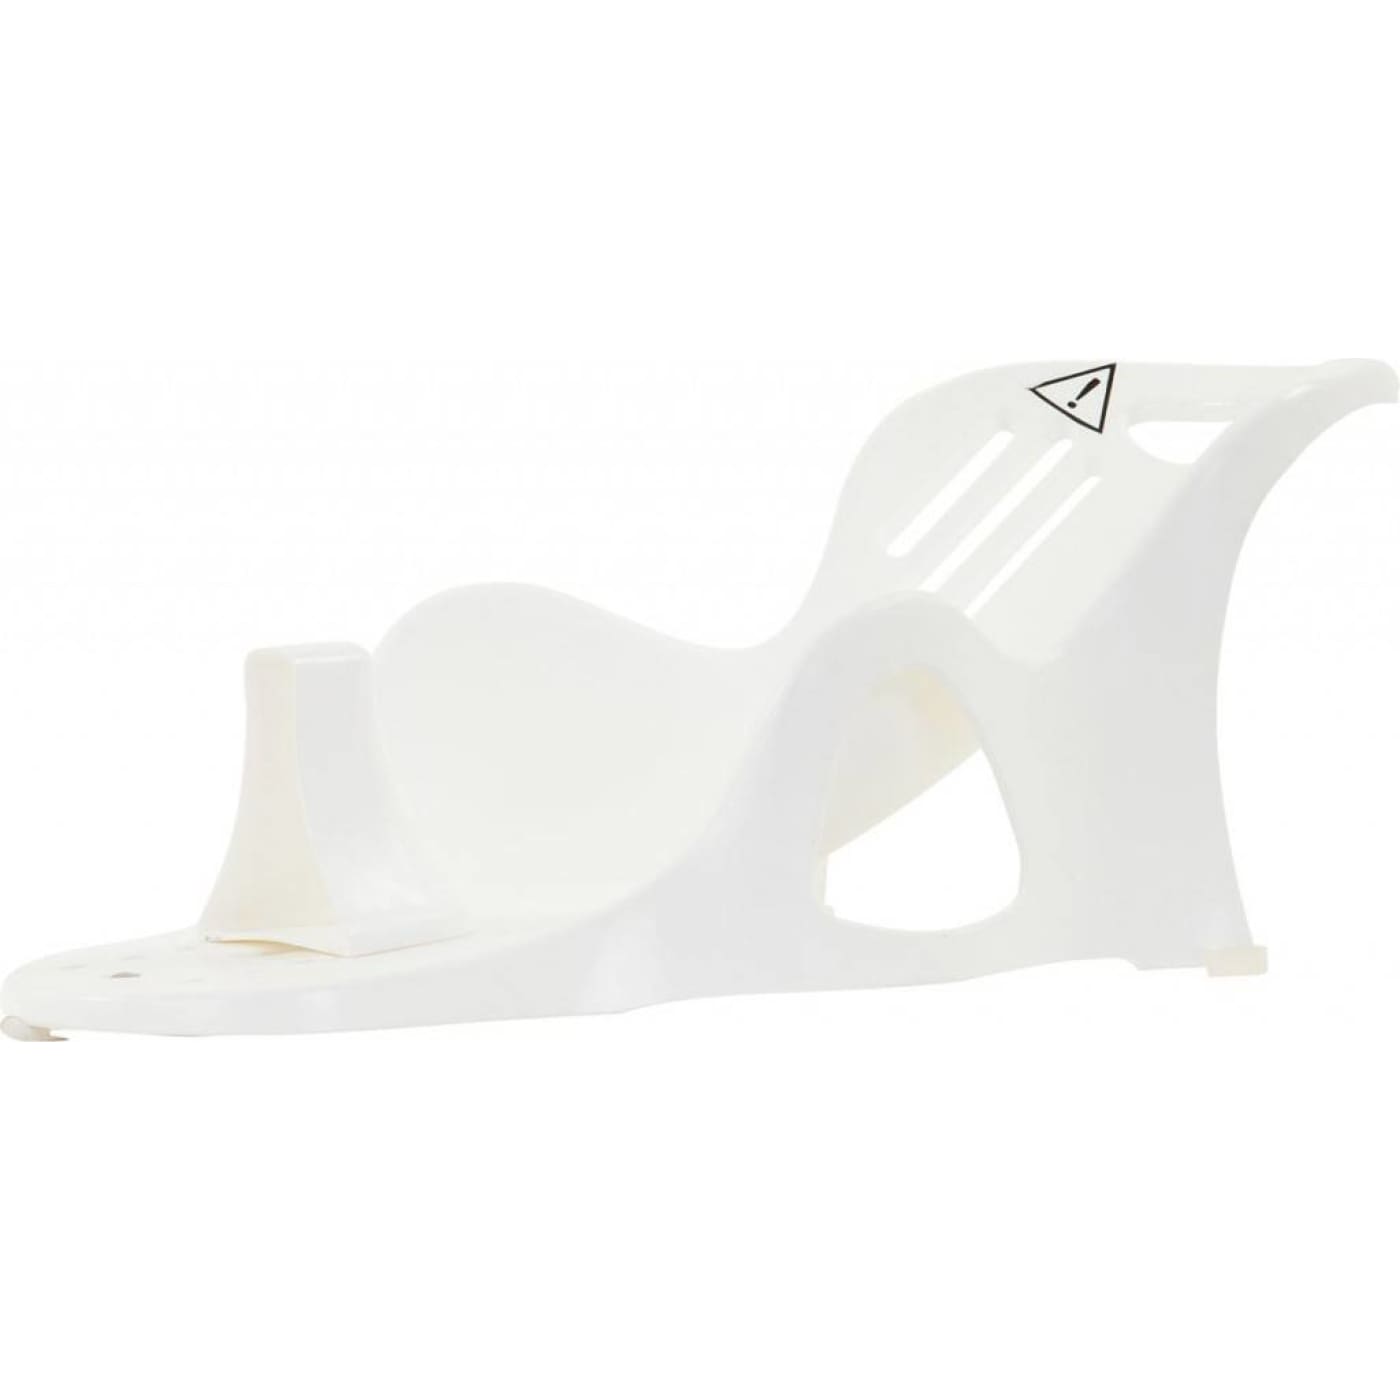 InfaSecure Nellie Bath Support - White - BATHTIME & CHANGING - BATH SUPPORTS/SEATS